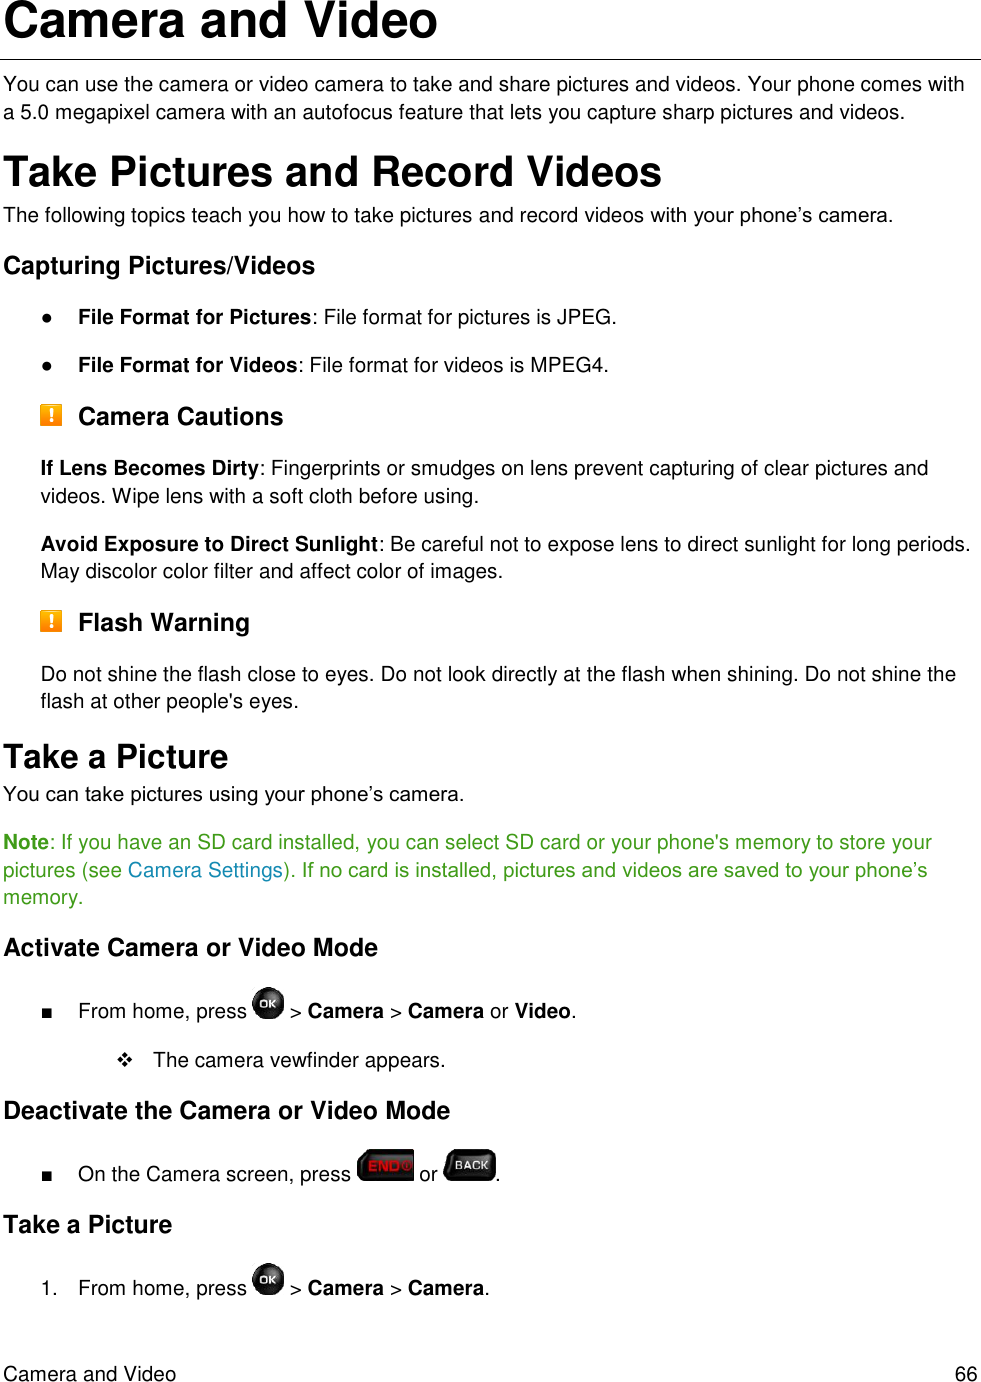 Camera and Video  66 Camera and Video You can use the camera or video camera to take and share pictures and videos. Your phone comes with a 5.0 megapixel camera with an autofocus feature that lets you capture sharp pictures and videos. Take Pictures and Record Videos The following topics teach you how to take pictures and record videos with your phone’s camera. Capturing Pictures/Videos ● File Format for Pictures: File format for pictures is JPEG. ● File Format for Videos: File format for videos is MPEG4.  Camera Cautions If Lens Becomes Dirty: Fingerprints or smudges on lens prevent capturing of clear pictures and videos. Wipe lens with a soft cloth before using. Avoid Exposure to Direct Sunlight: Be careful not to expose lens to direct sunlight for long periods. May discolor color filter and affect color of images.  Flash Warning Do not shine the flash close to eyes. Do not look directly at the flash when shining. Do not shine the flash at other people&apos;s eyes.  Take a Picture You can take pictures using your phone’s camera. Note: If you have an SD card installed, you can select SD card or your phone&apos;s memory to store your pictures (see Camera Settings). If no card is installed, pictures and videos are saved to your phone’s memory. Activate Camera or Video Mode ■  From home, press   &gt; Camera &gt; Camera or Video.    The camera vewfinder appears. Deactivate the Camera or Video Mode ■  On the Camera screen, press   or  . Take a Picture 1.  From home, press  &gt; Camera &gt; Camera. 